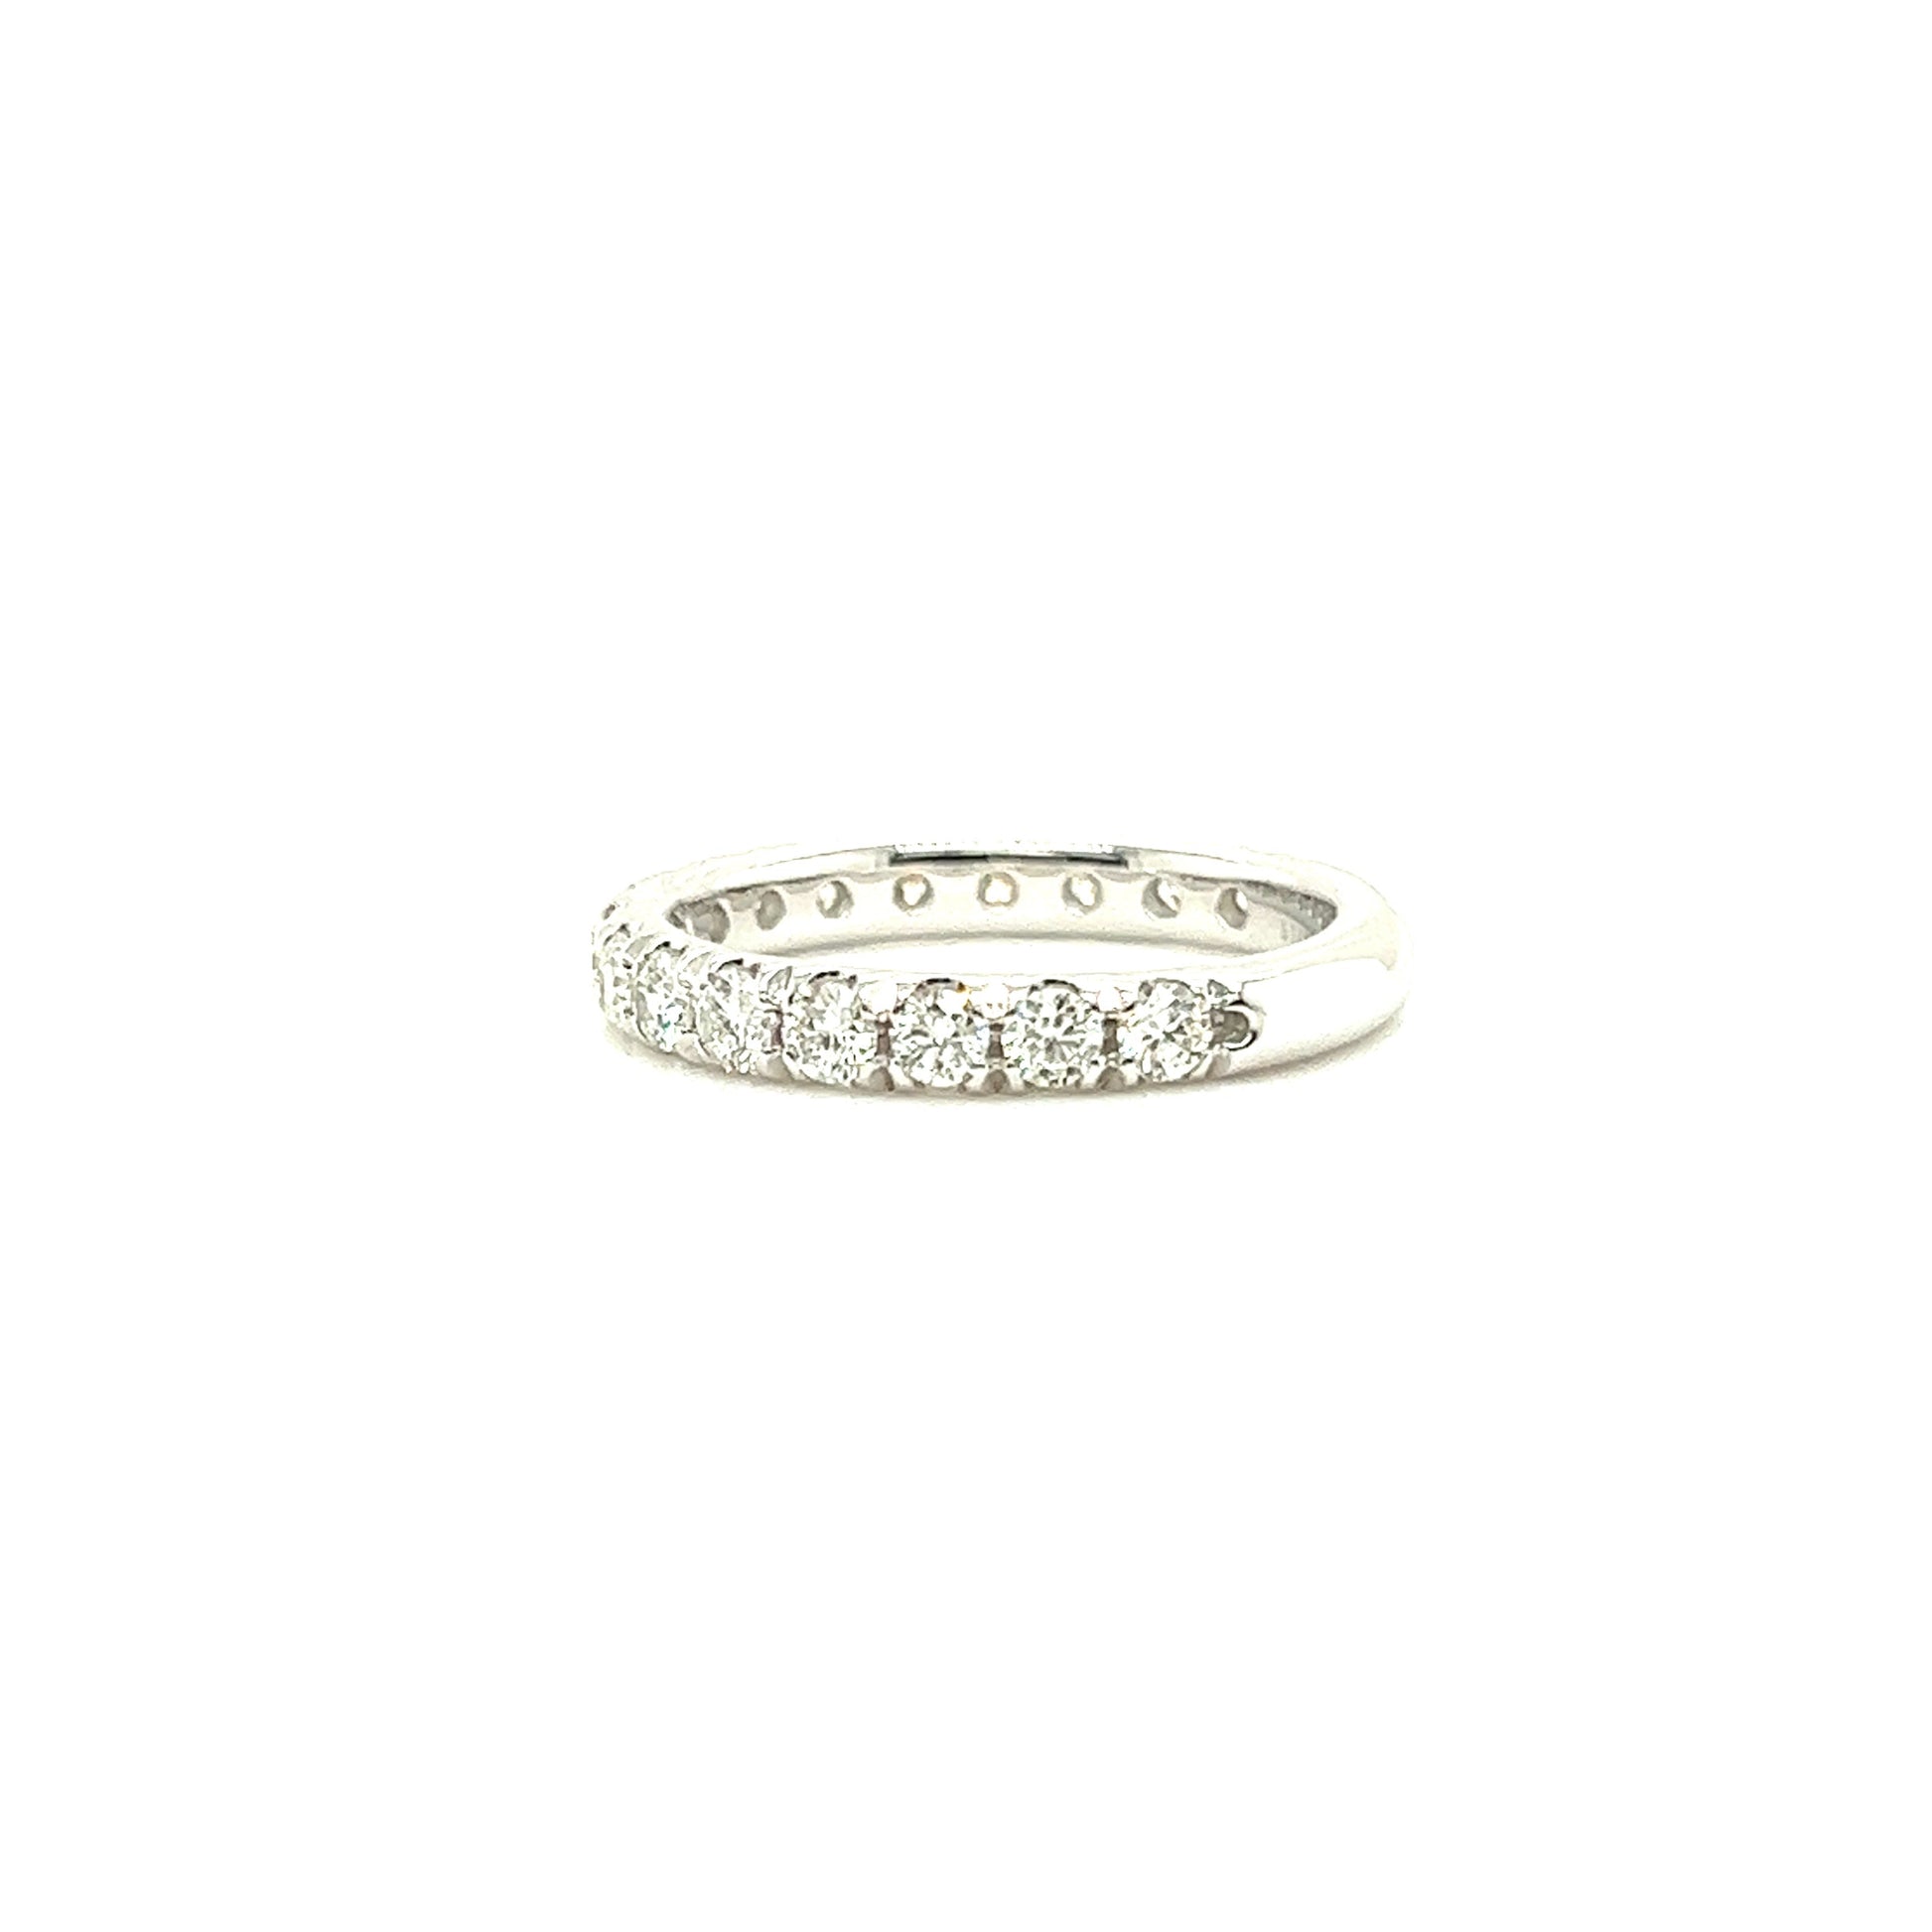 French-set Diamond Ring with 1ctw of Diamonds in 14K White Gold Right Side View